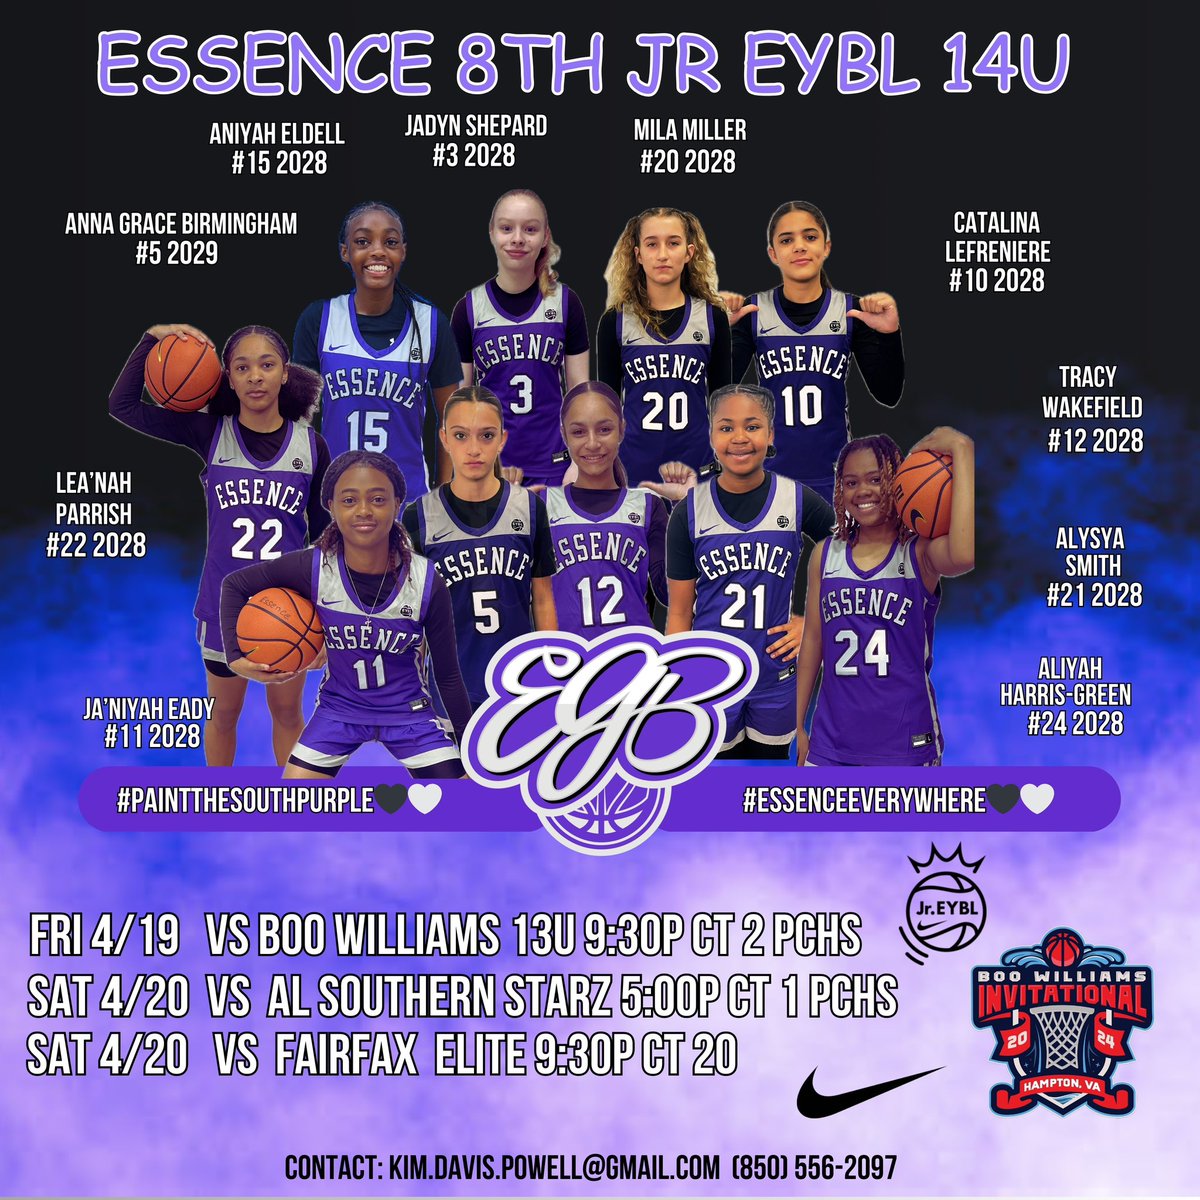 🚨Coaches☑️Us Out🚨
#EGB #EssenceEverywhere #PaintTheSouthPurple💜🖤#EYBL #EYCL #BooWilliams